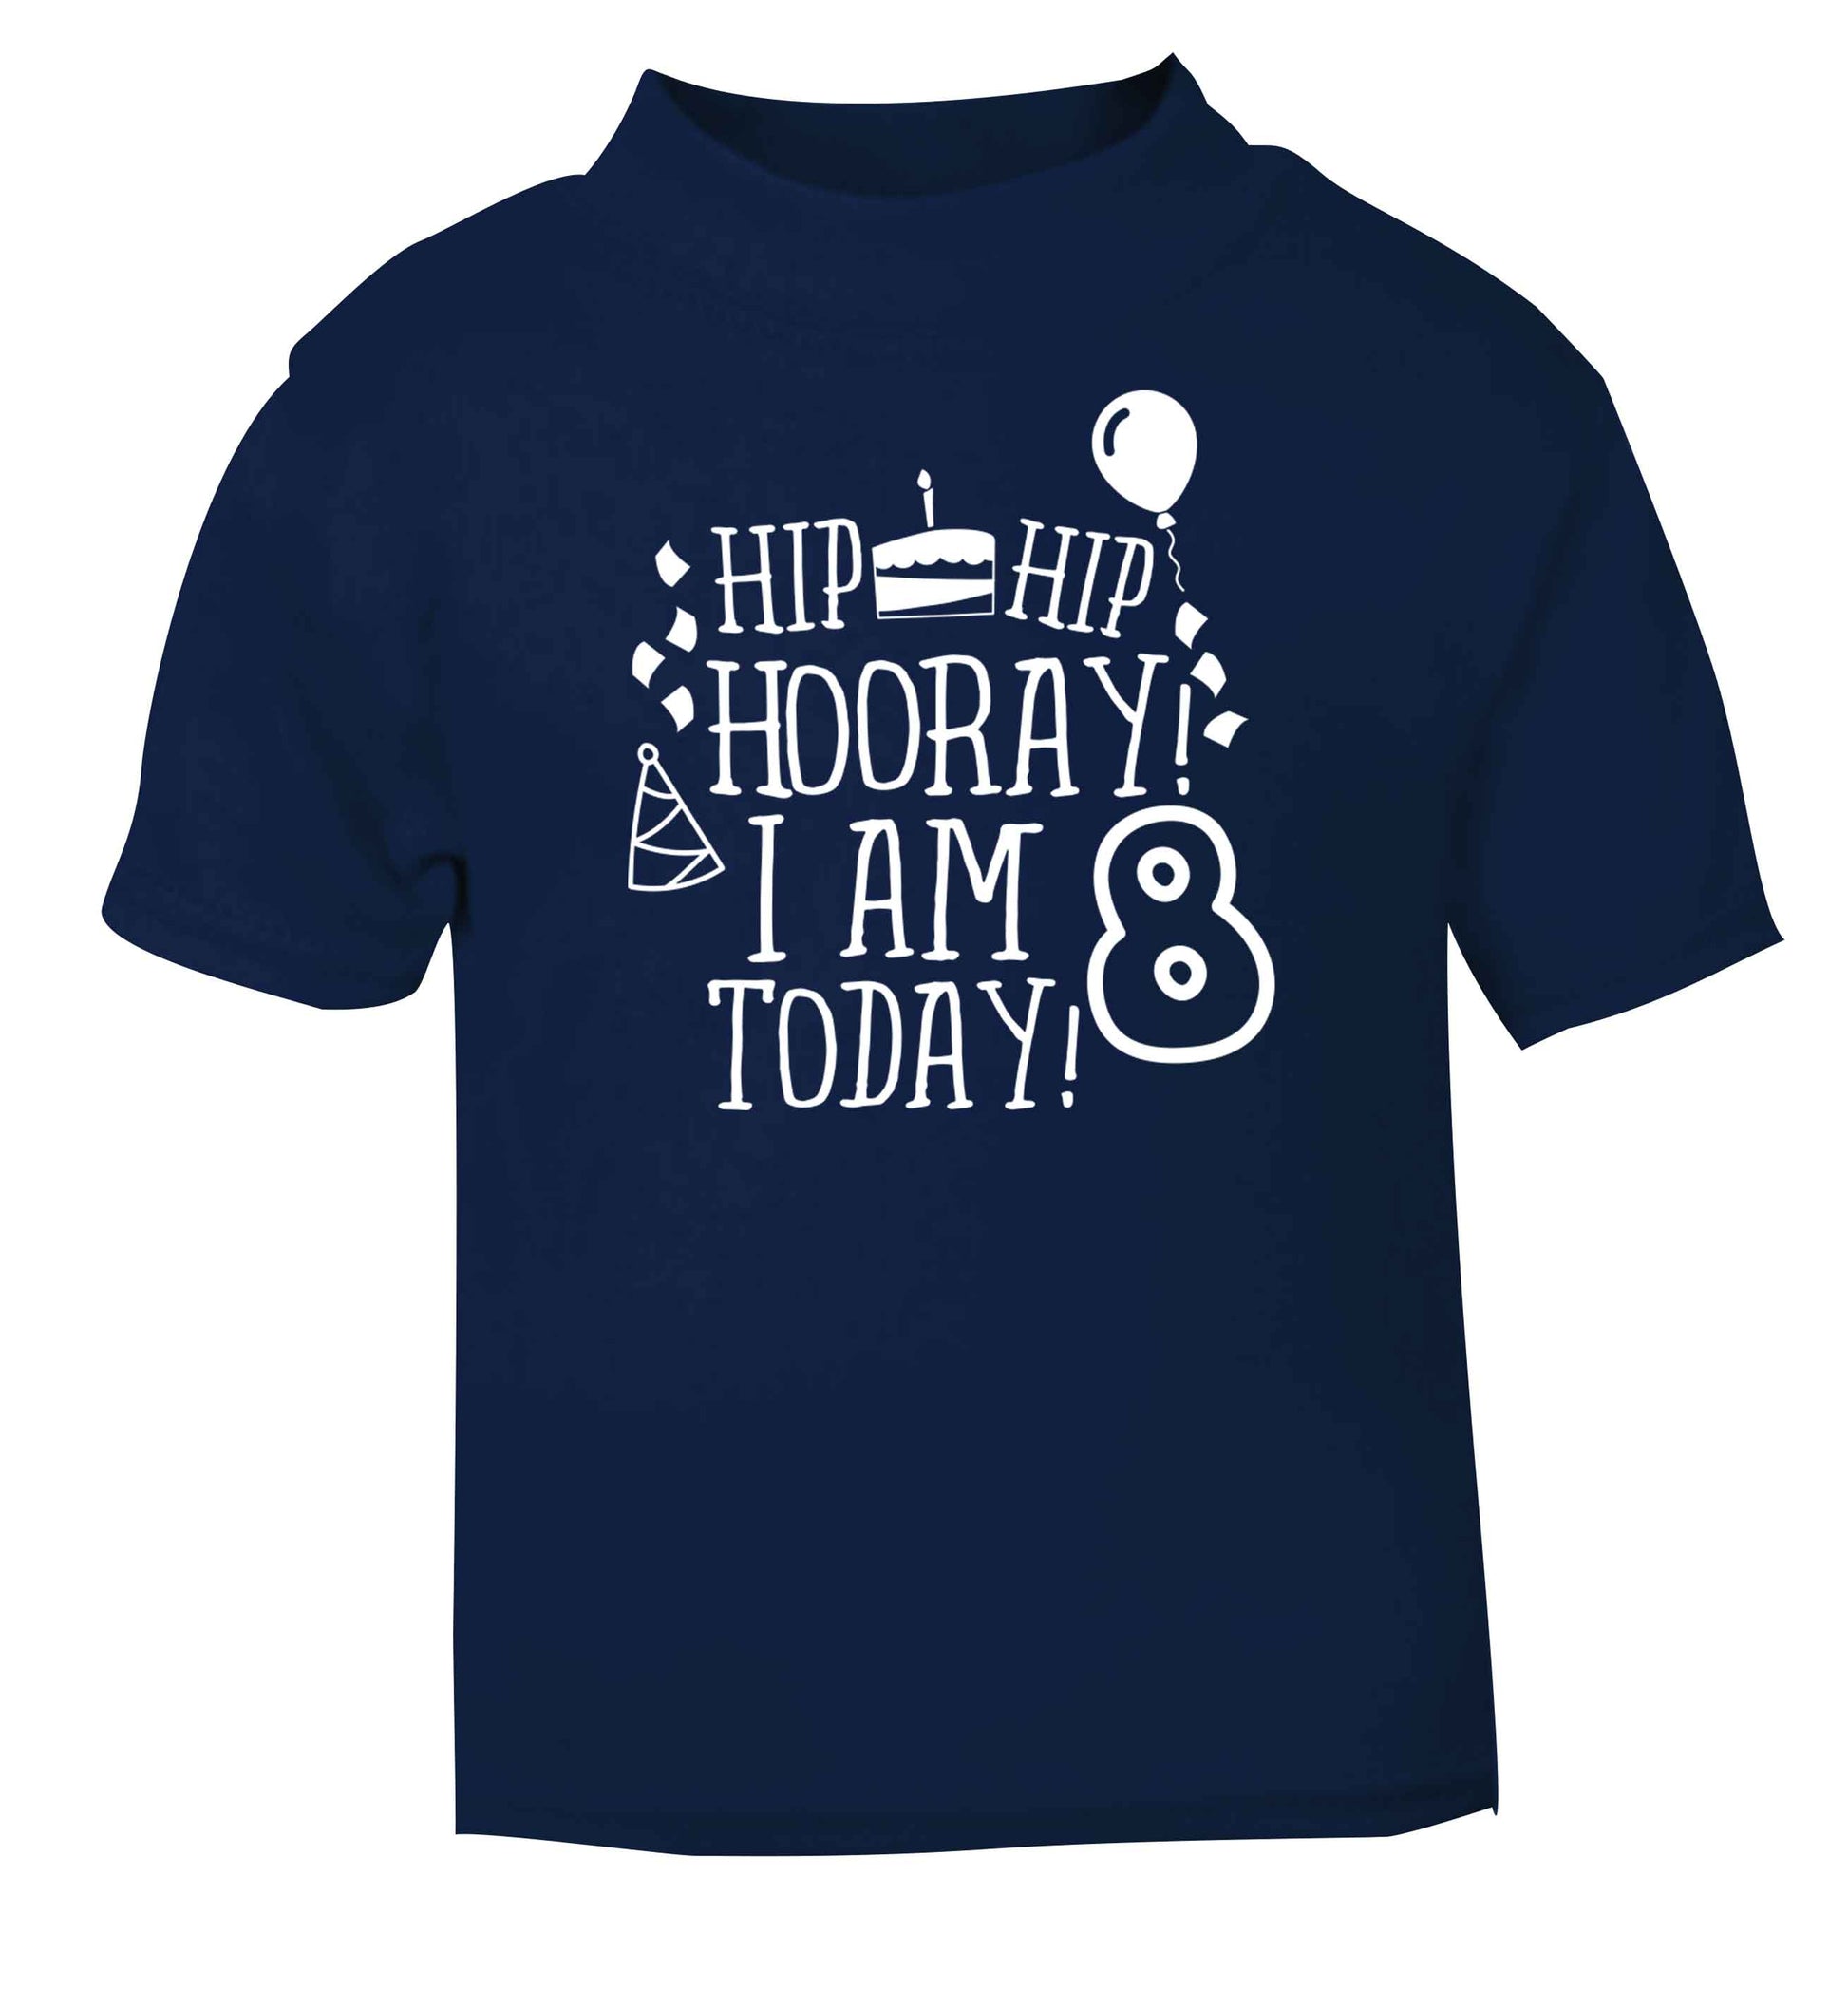 Hip hip hooray I am 8 today! navy baby toddler Tshirt 2 Years